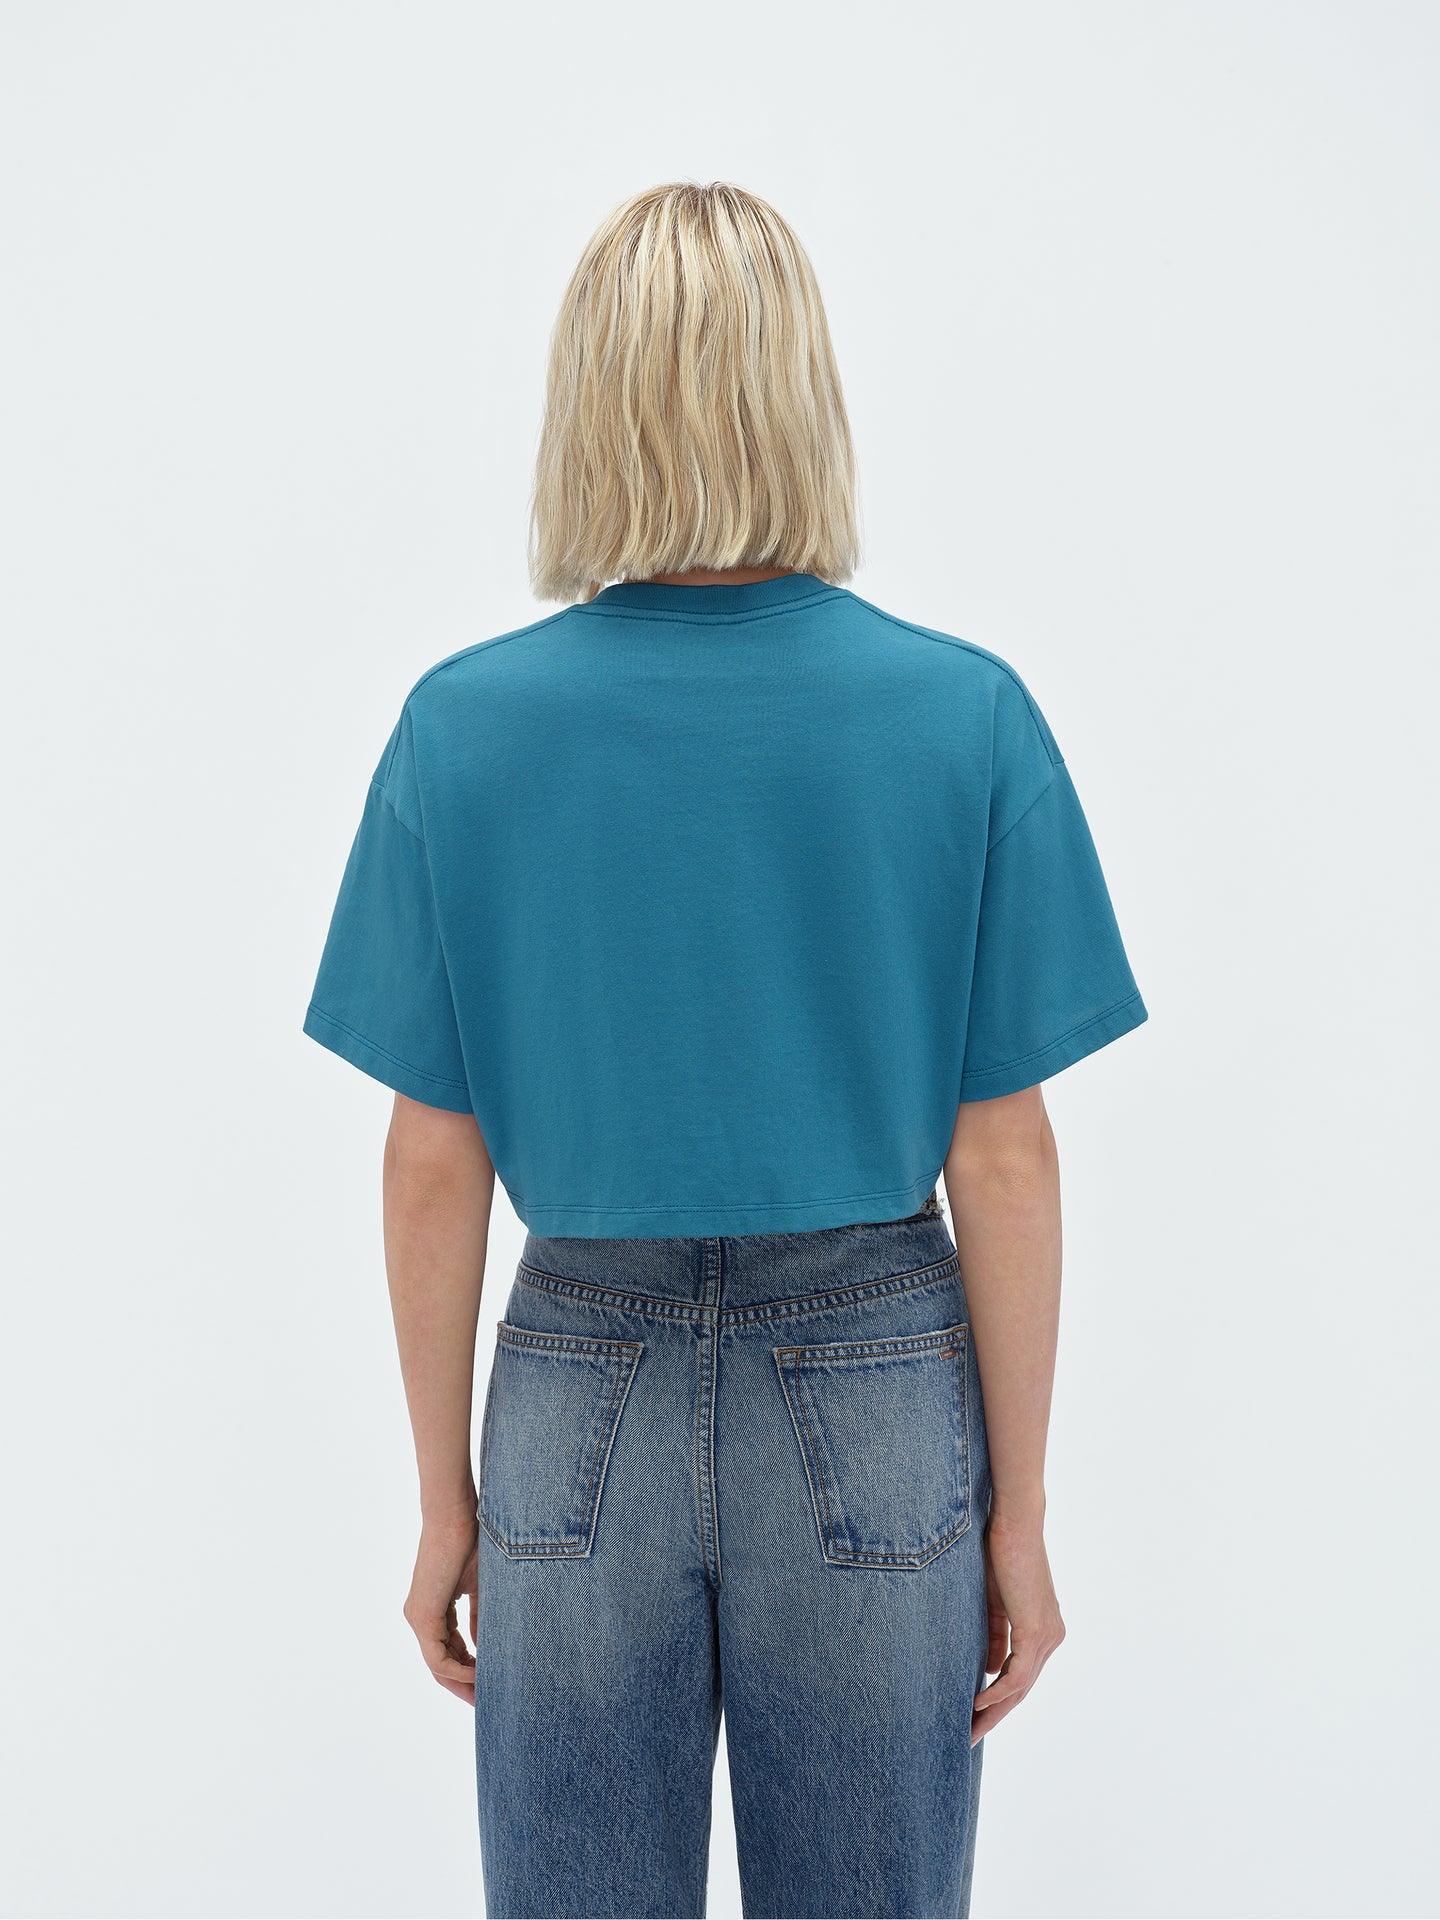 WOMEN - ARTS DISTRICT CROPPED TEE - Blue